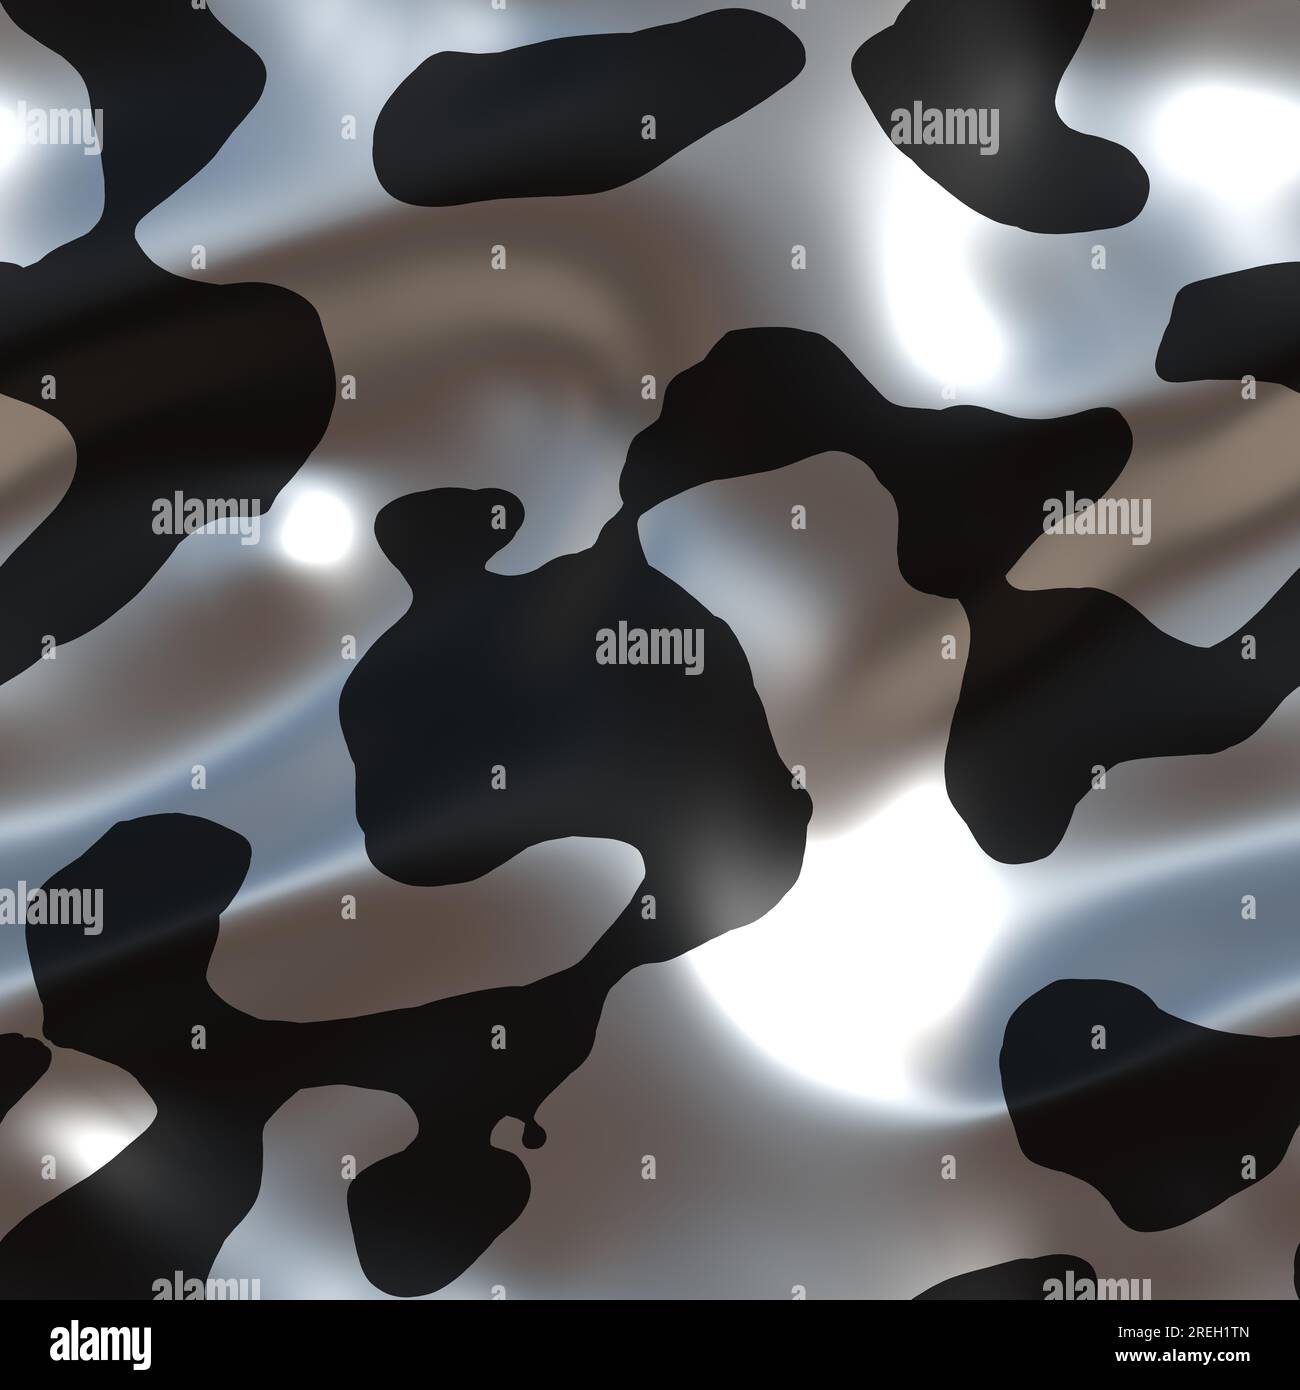 Seamless pattern black cow hair texture. Decorative background for print, textile, fabric, wallpaper, poster, home decor, packaging, wrapping paper, b Stock Photo